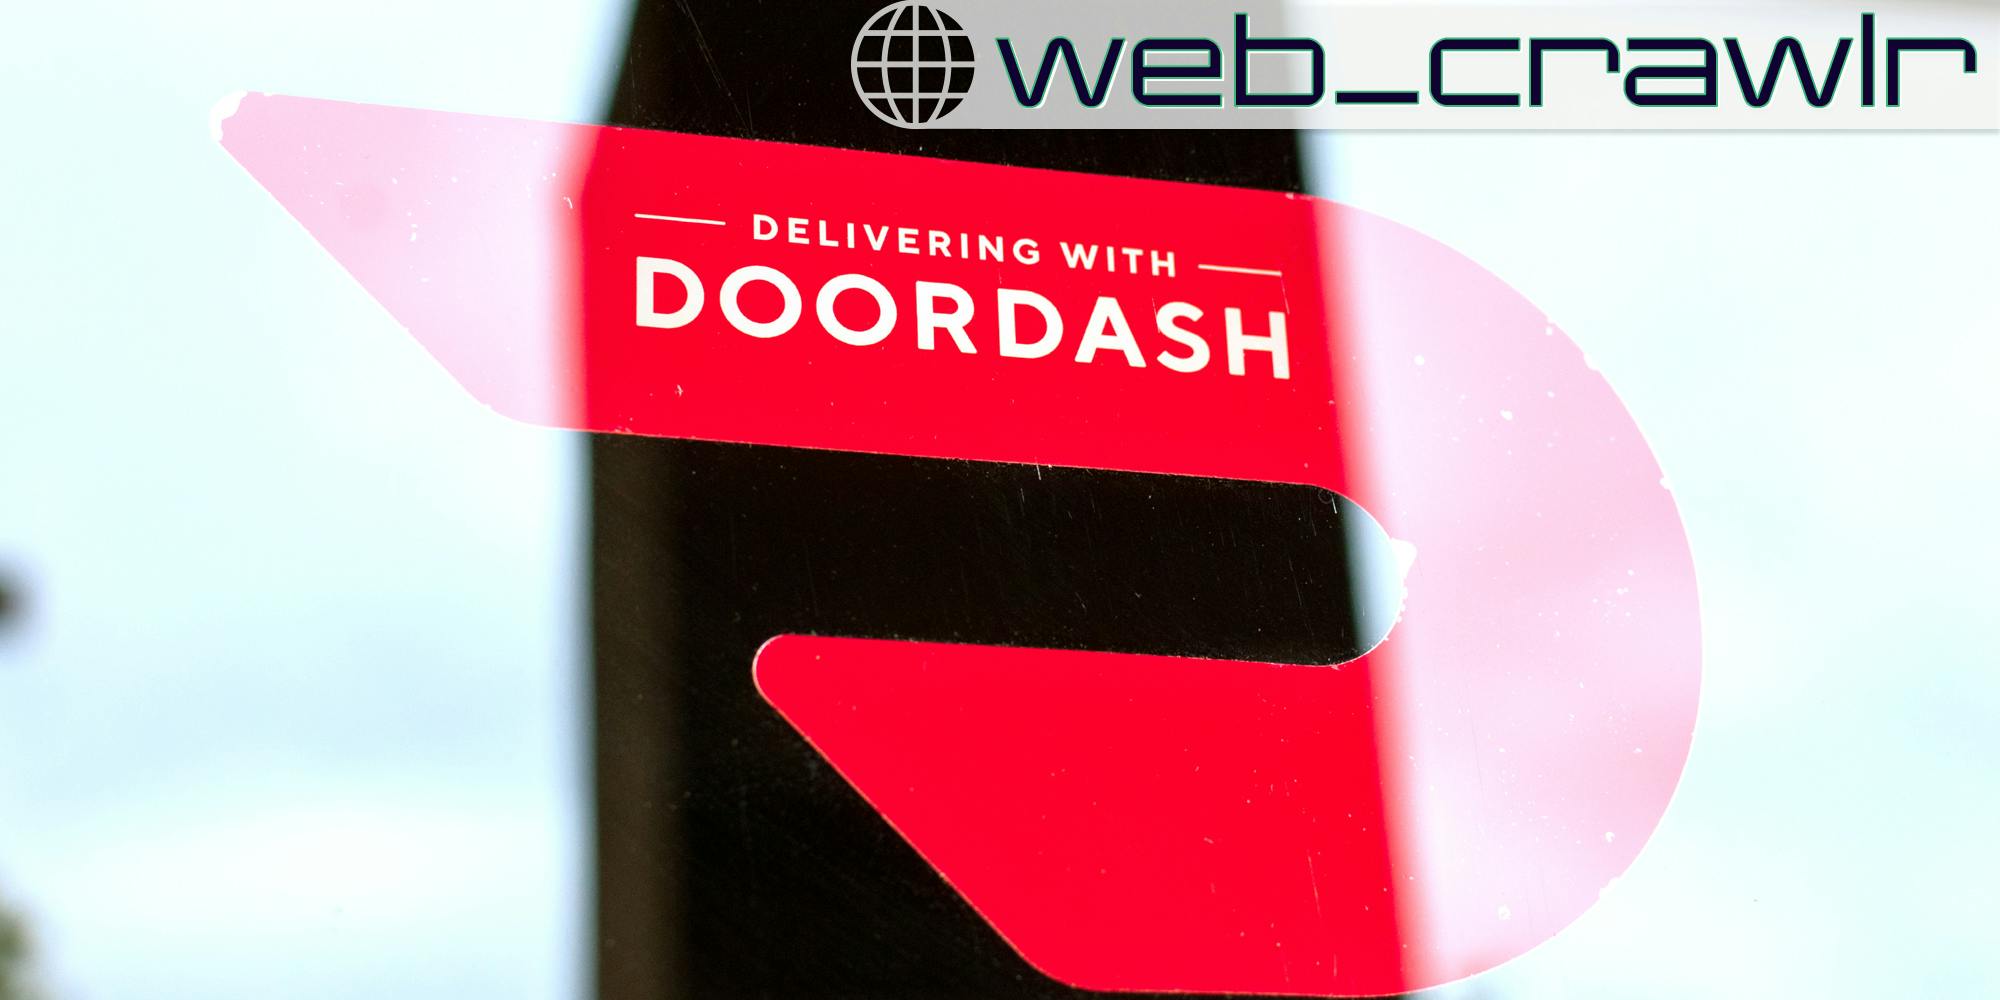 A sticker that says 'Delivering with DoorDash.' The Daily Dot newsletter web_crawlr logo is in the top right corner.